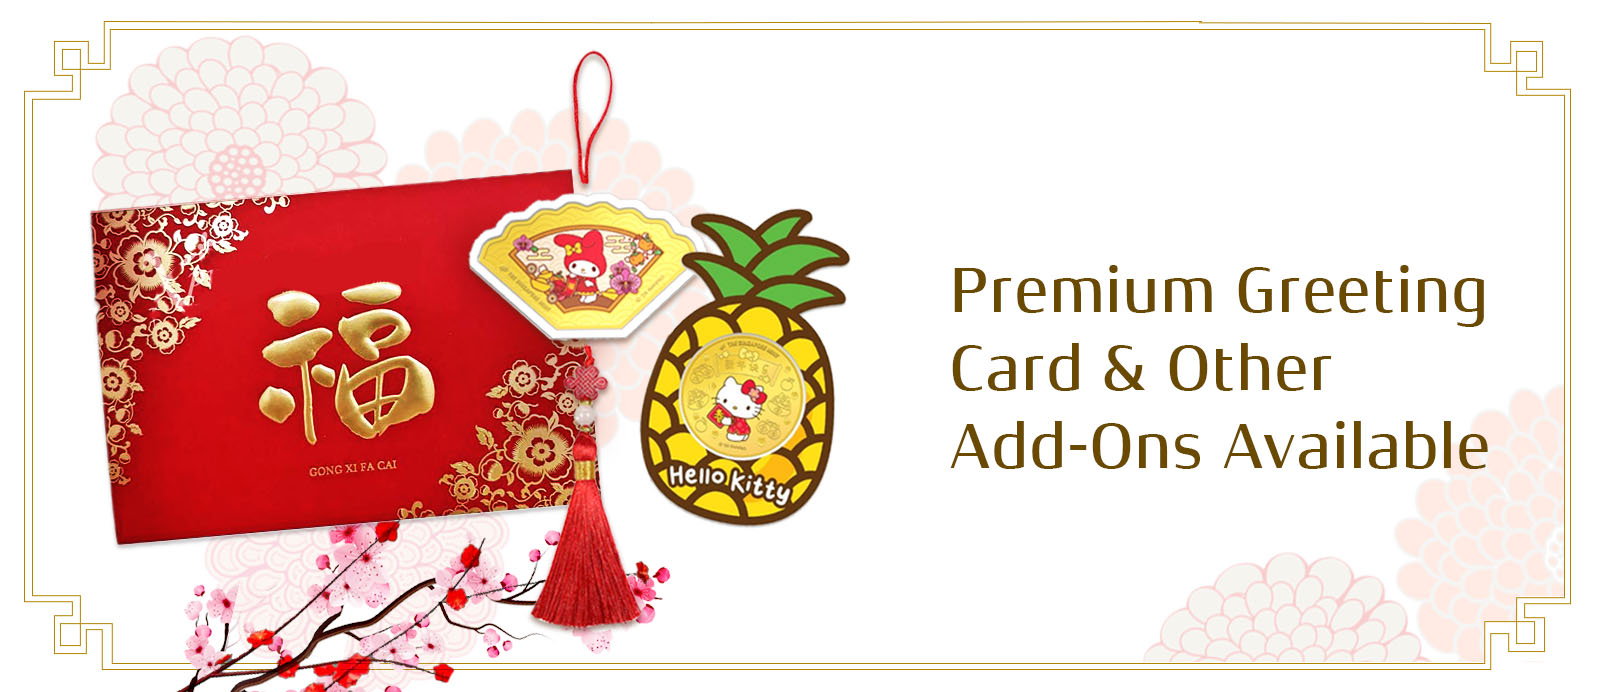 Premium Greeting Cards & Sanrio Medallions Available As Add-Ons